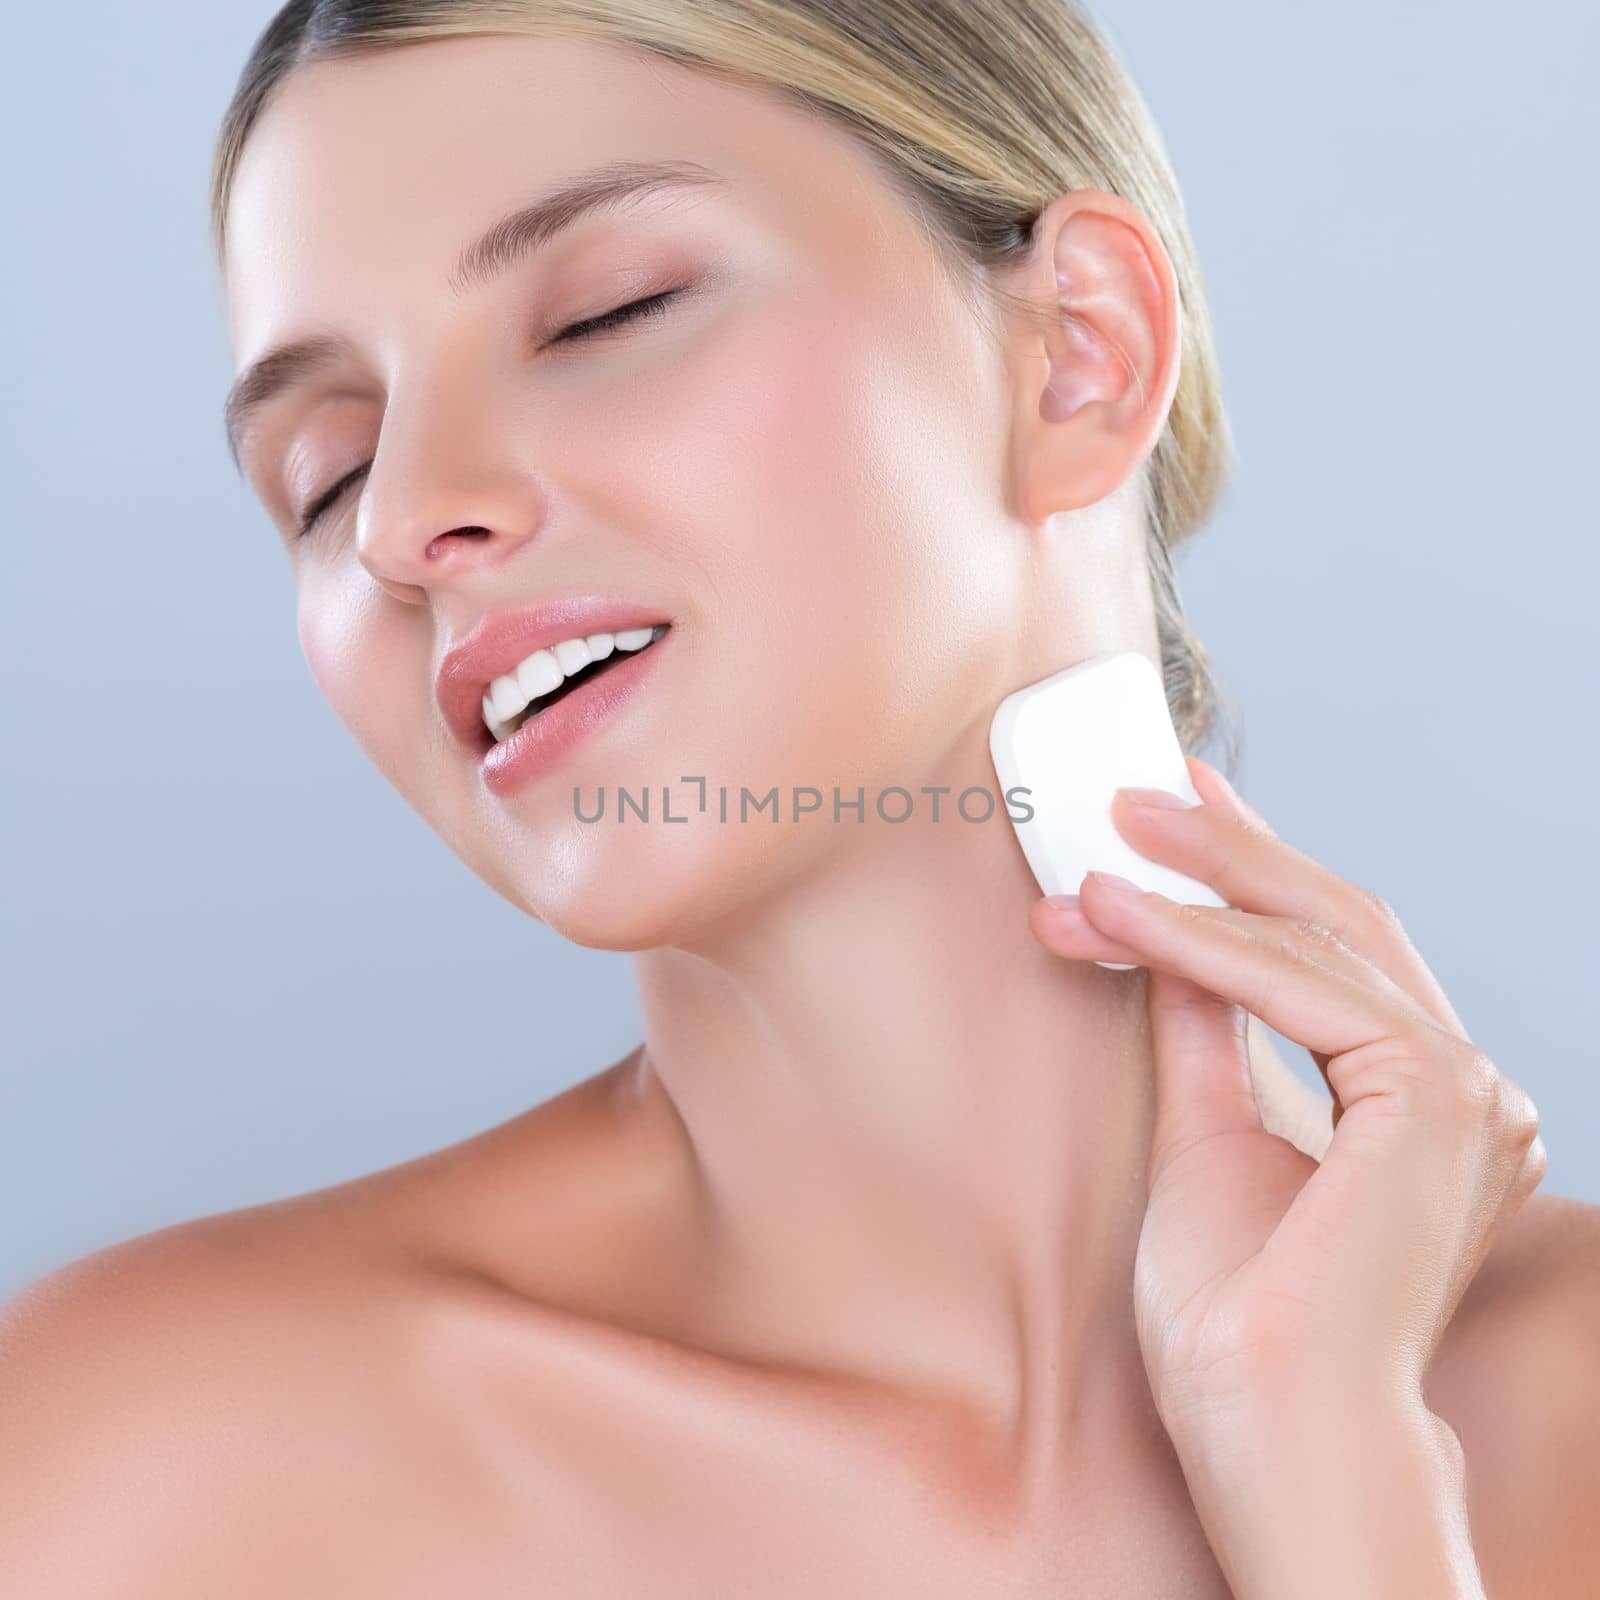 Closeup alluring beautiful female model applying powder puff for facial makeup concept. Portrait of flawless perfect cosmetic skin woman put powder foundation on her face in isolated background.